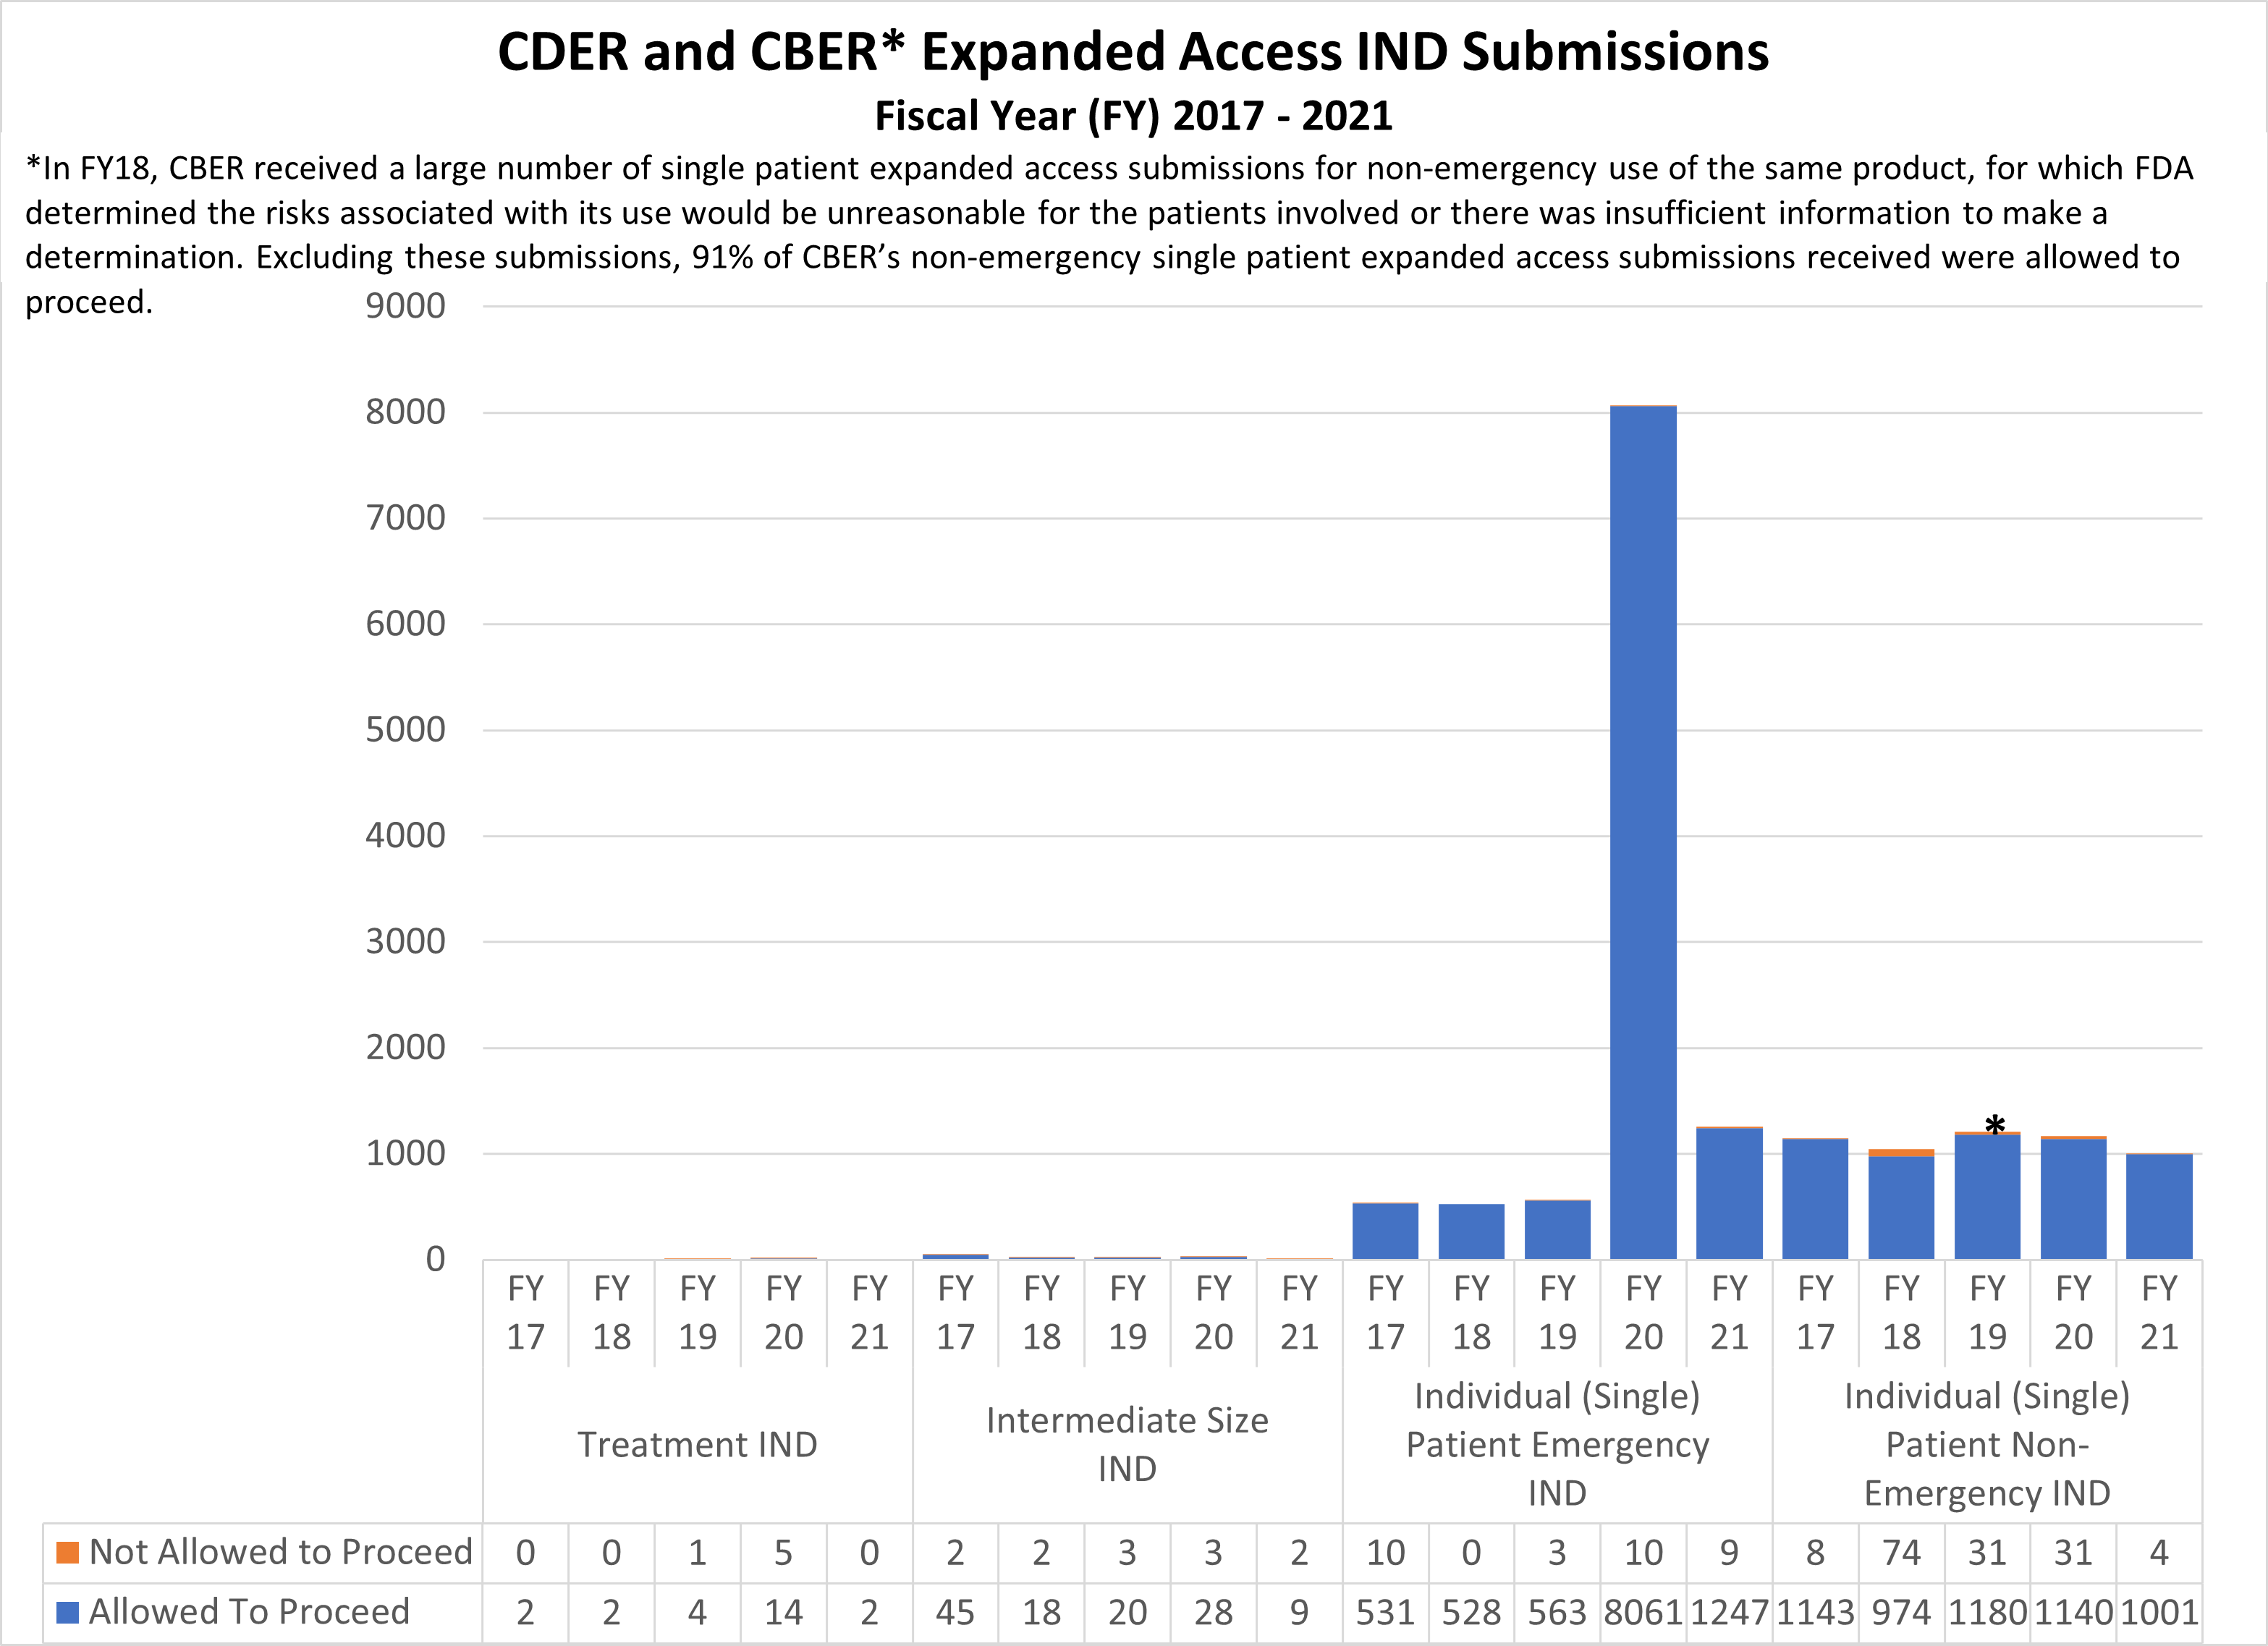 CDER and CBER Expanded Access IND Submissions